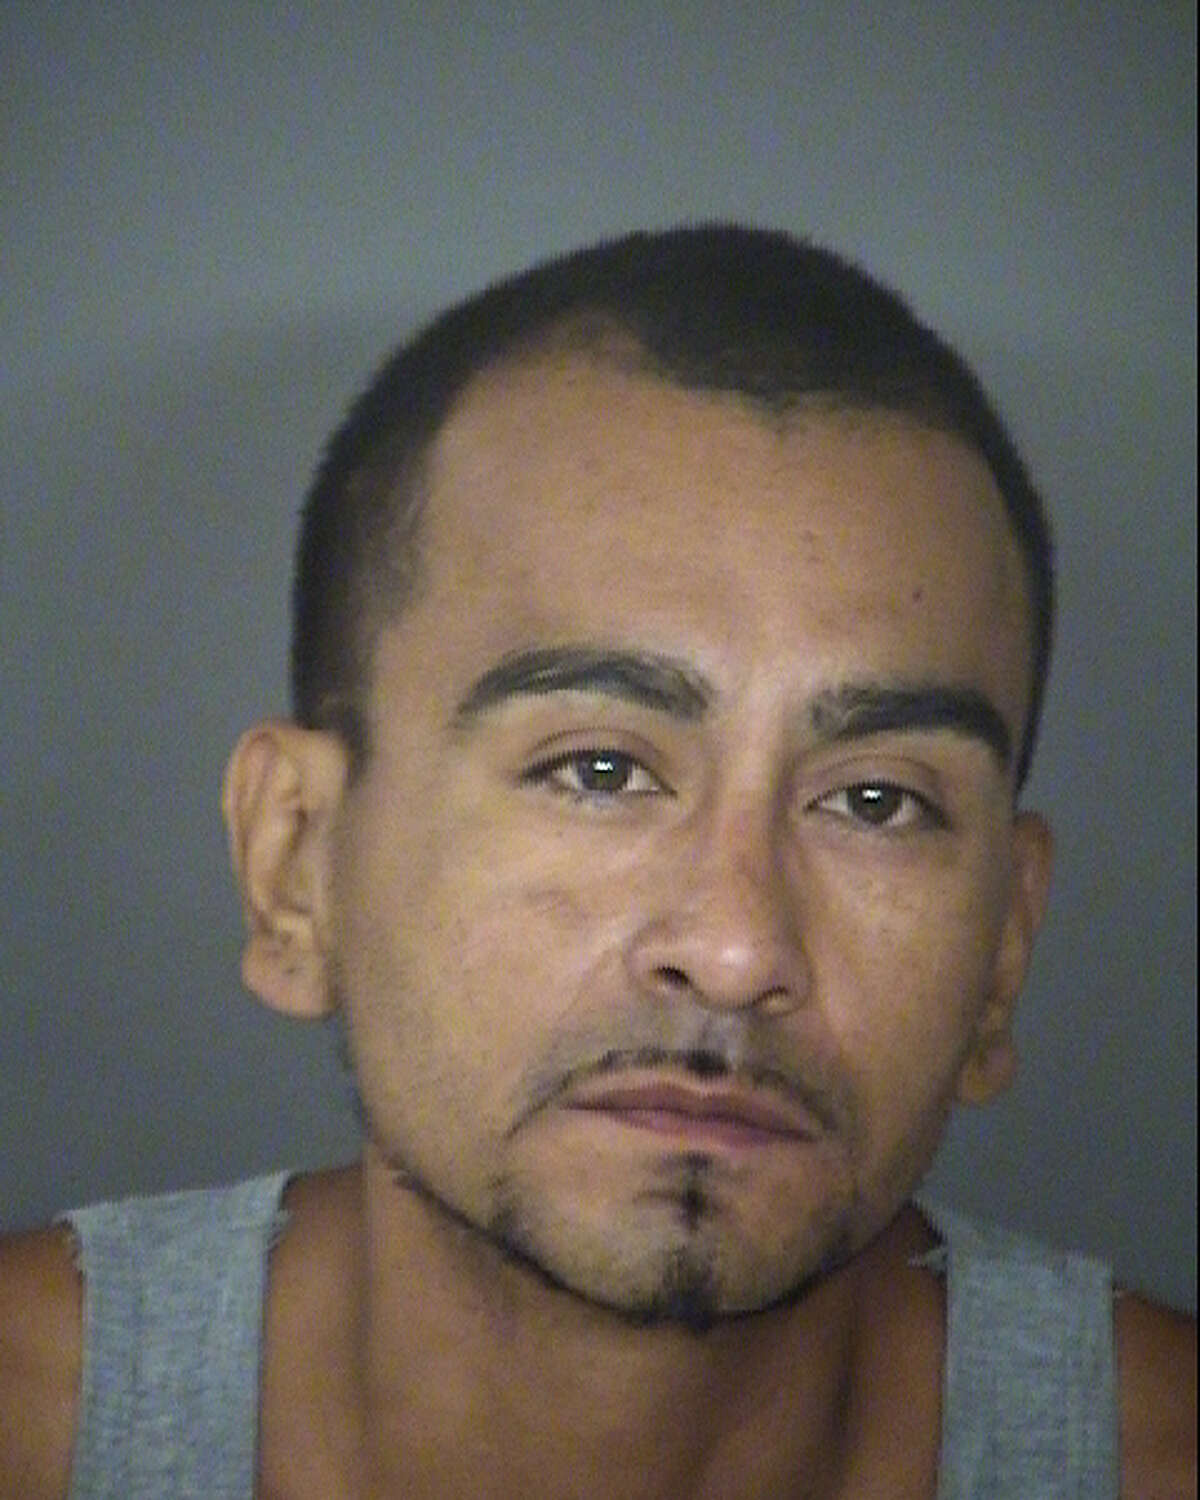 Roland Gonzales is suspected of stealing more than $100 worth of steak from H-E-B.